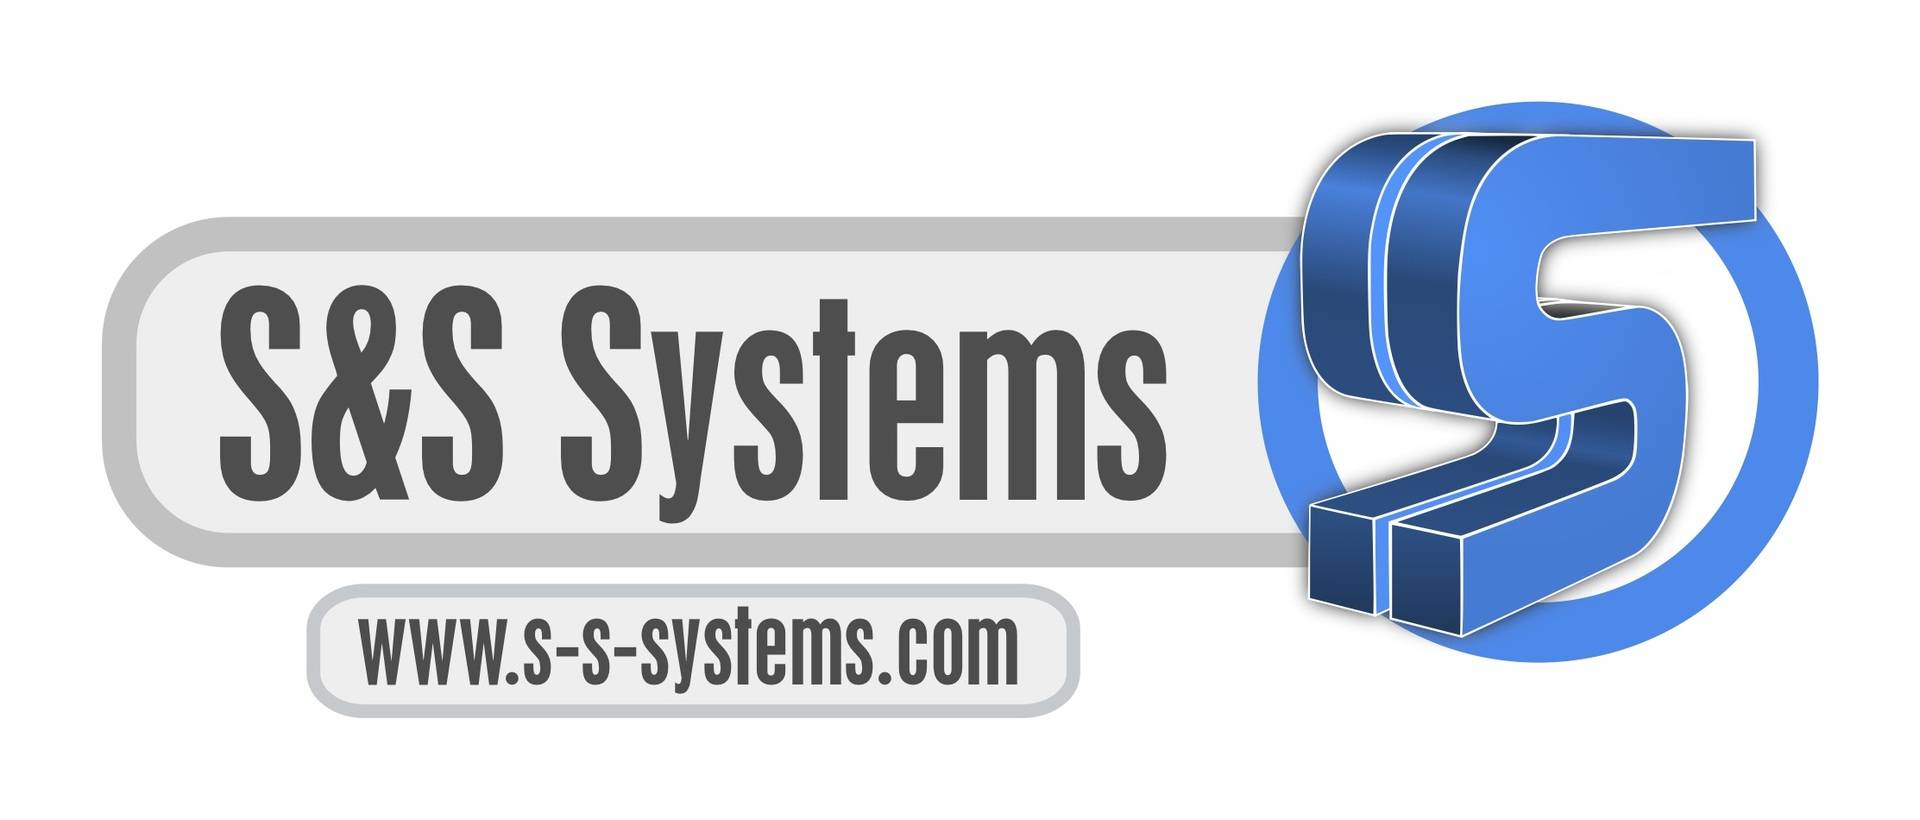 S&S Systems - logo